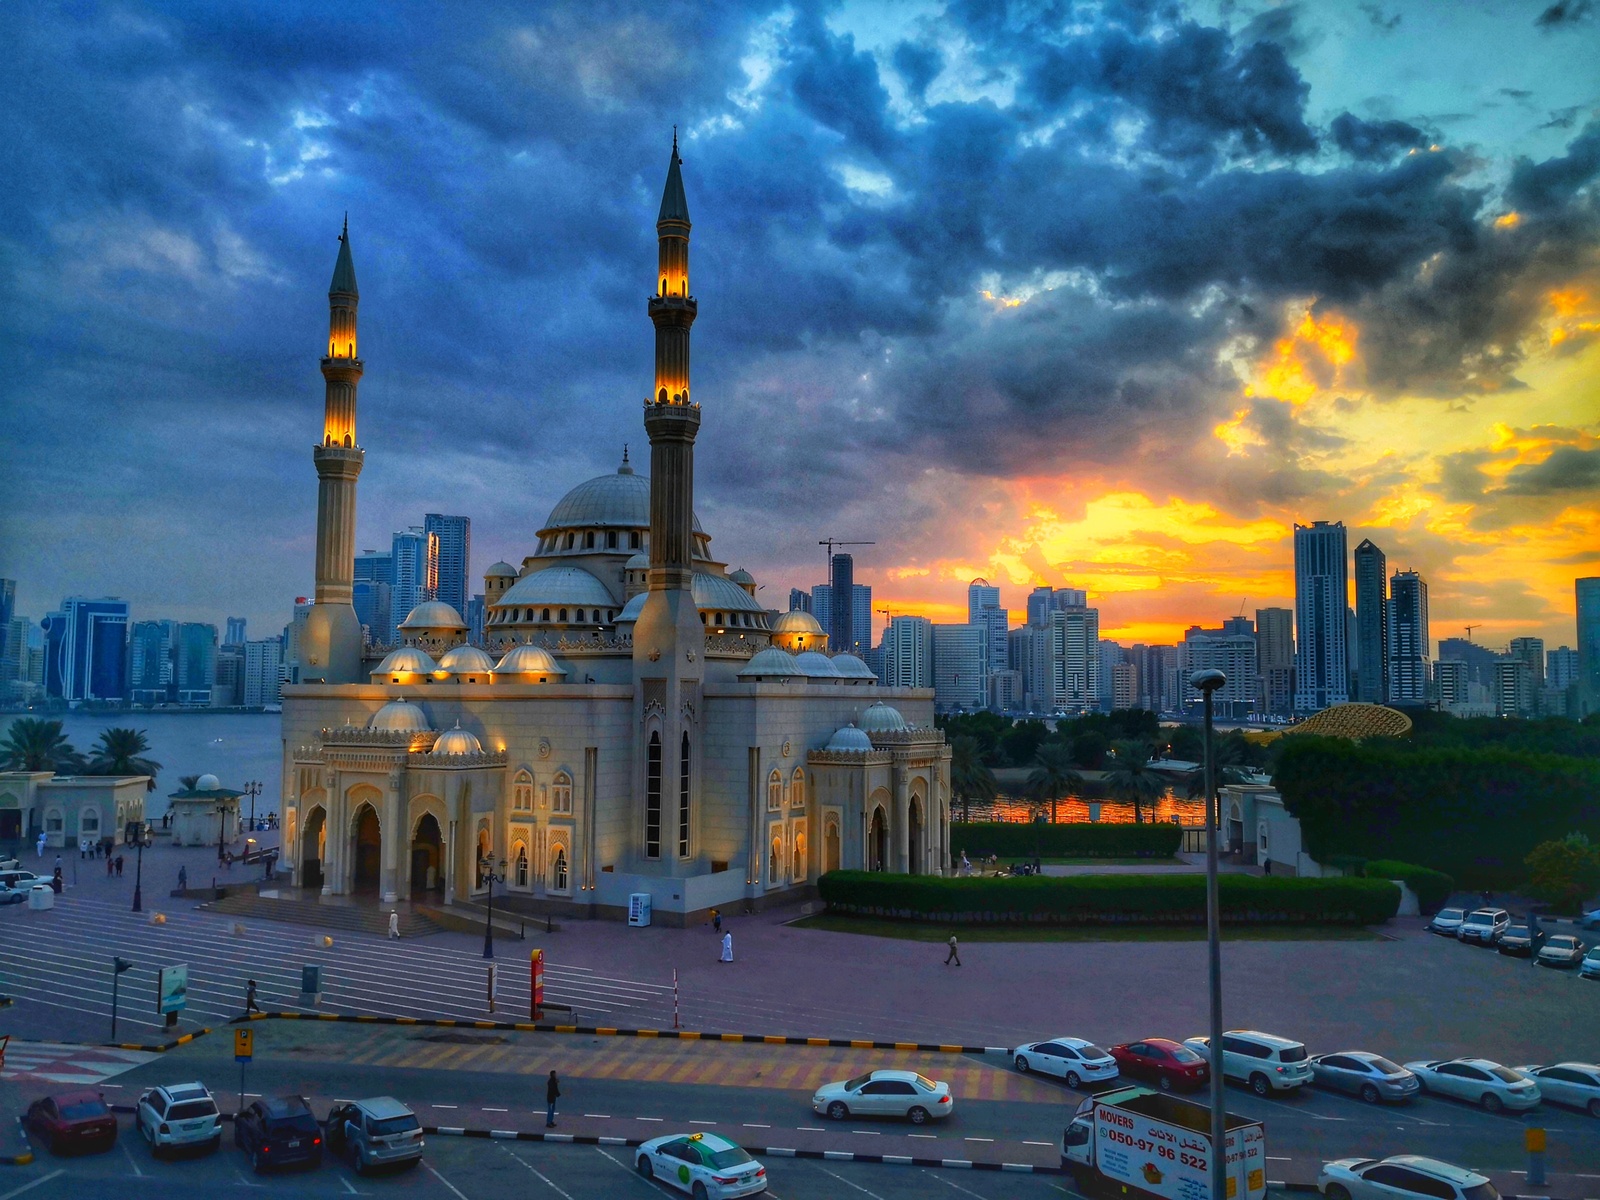 Image of Sharjah Mosque by Team PhotoHound